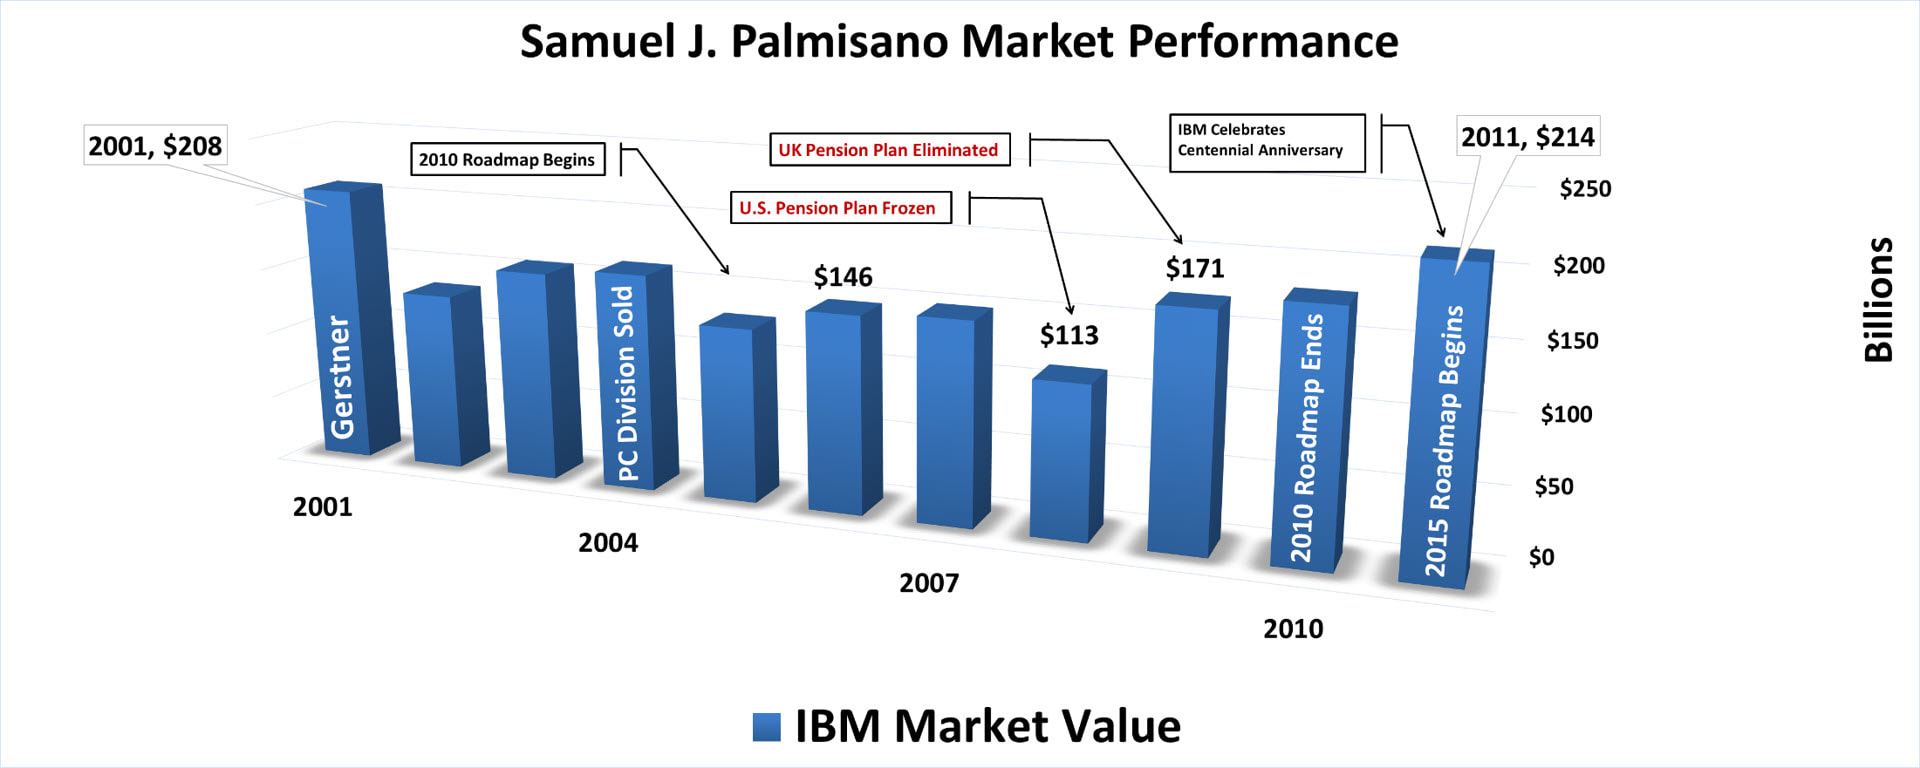 A color bar chart showing IBM's yearly market value from 2001 to 2011 for Chief Executive Officer (CEO) Samuel J. (Sam) Palmisano.